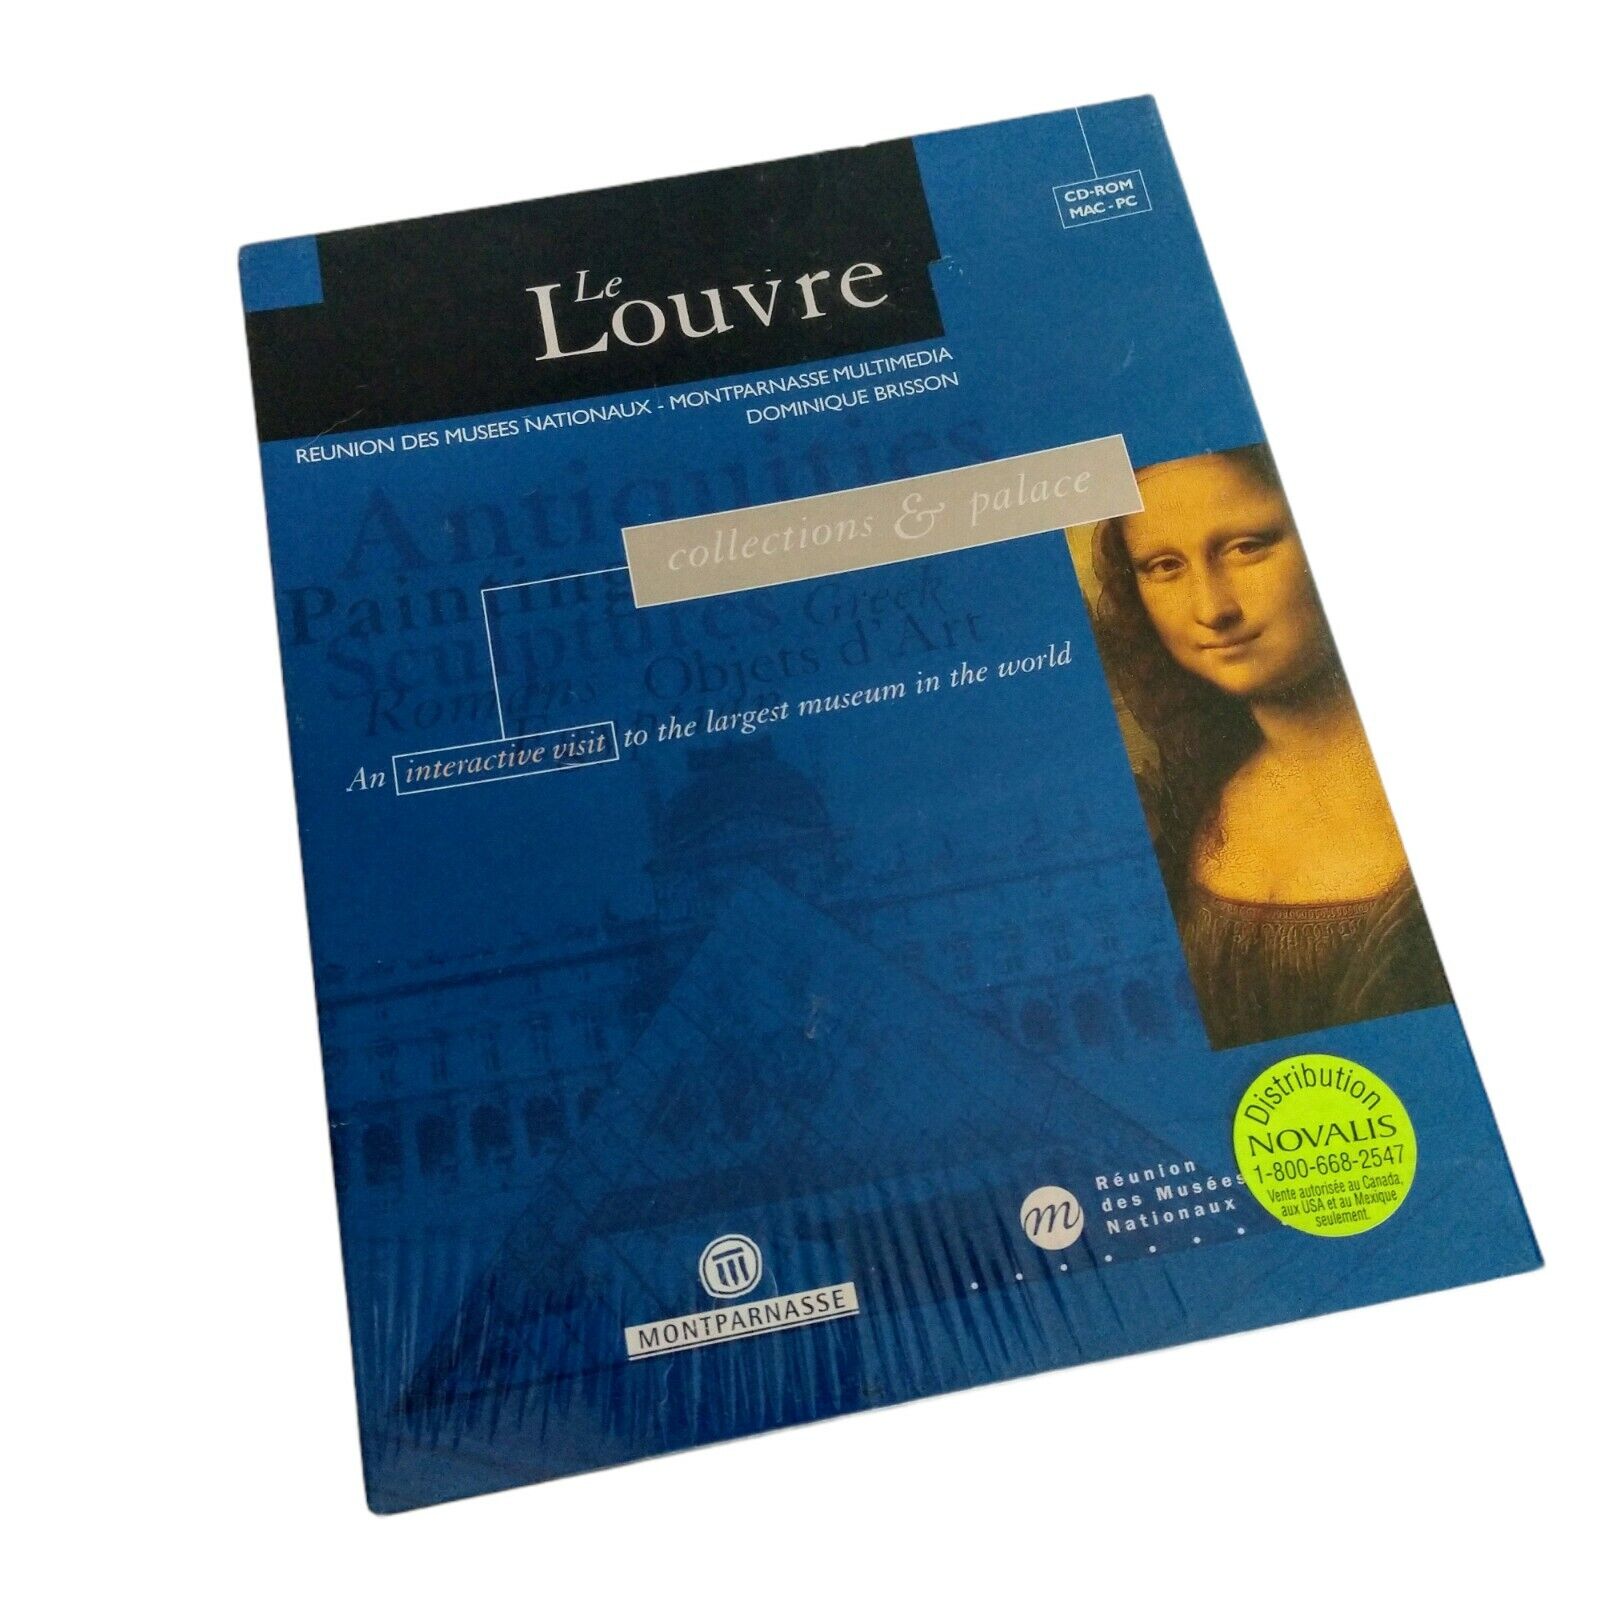 Le Louvre CD-ROM Interactive Visit World's Largest Museum Collections/ Palace